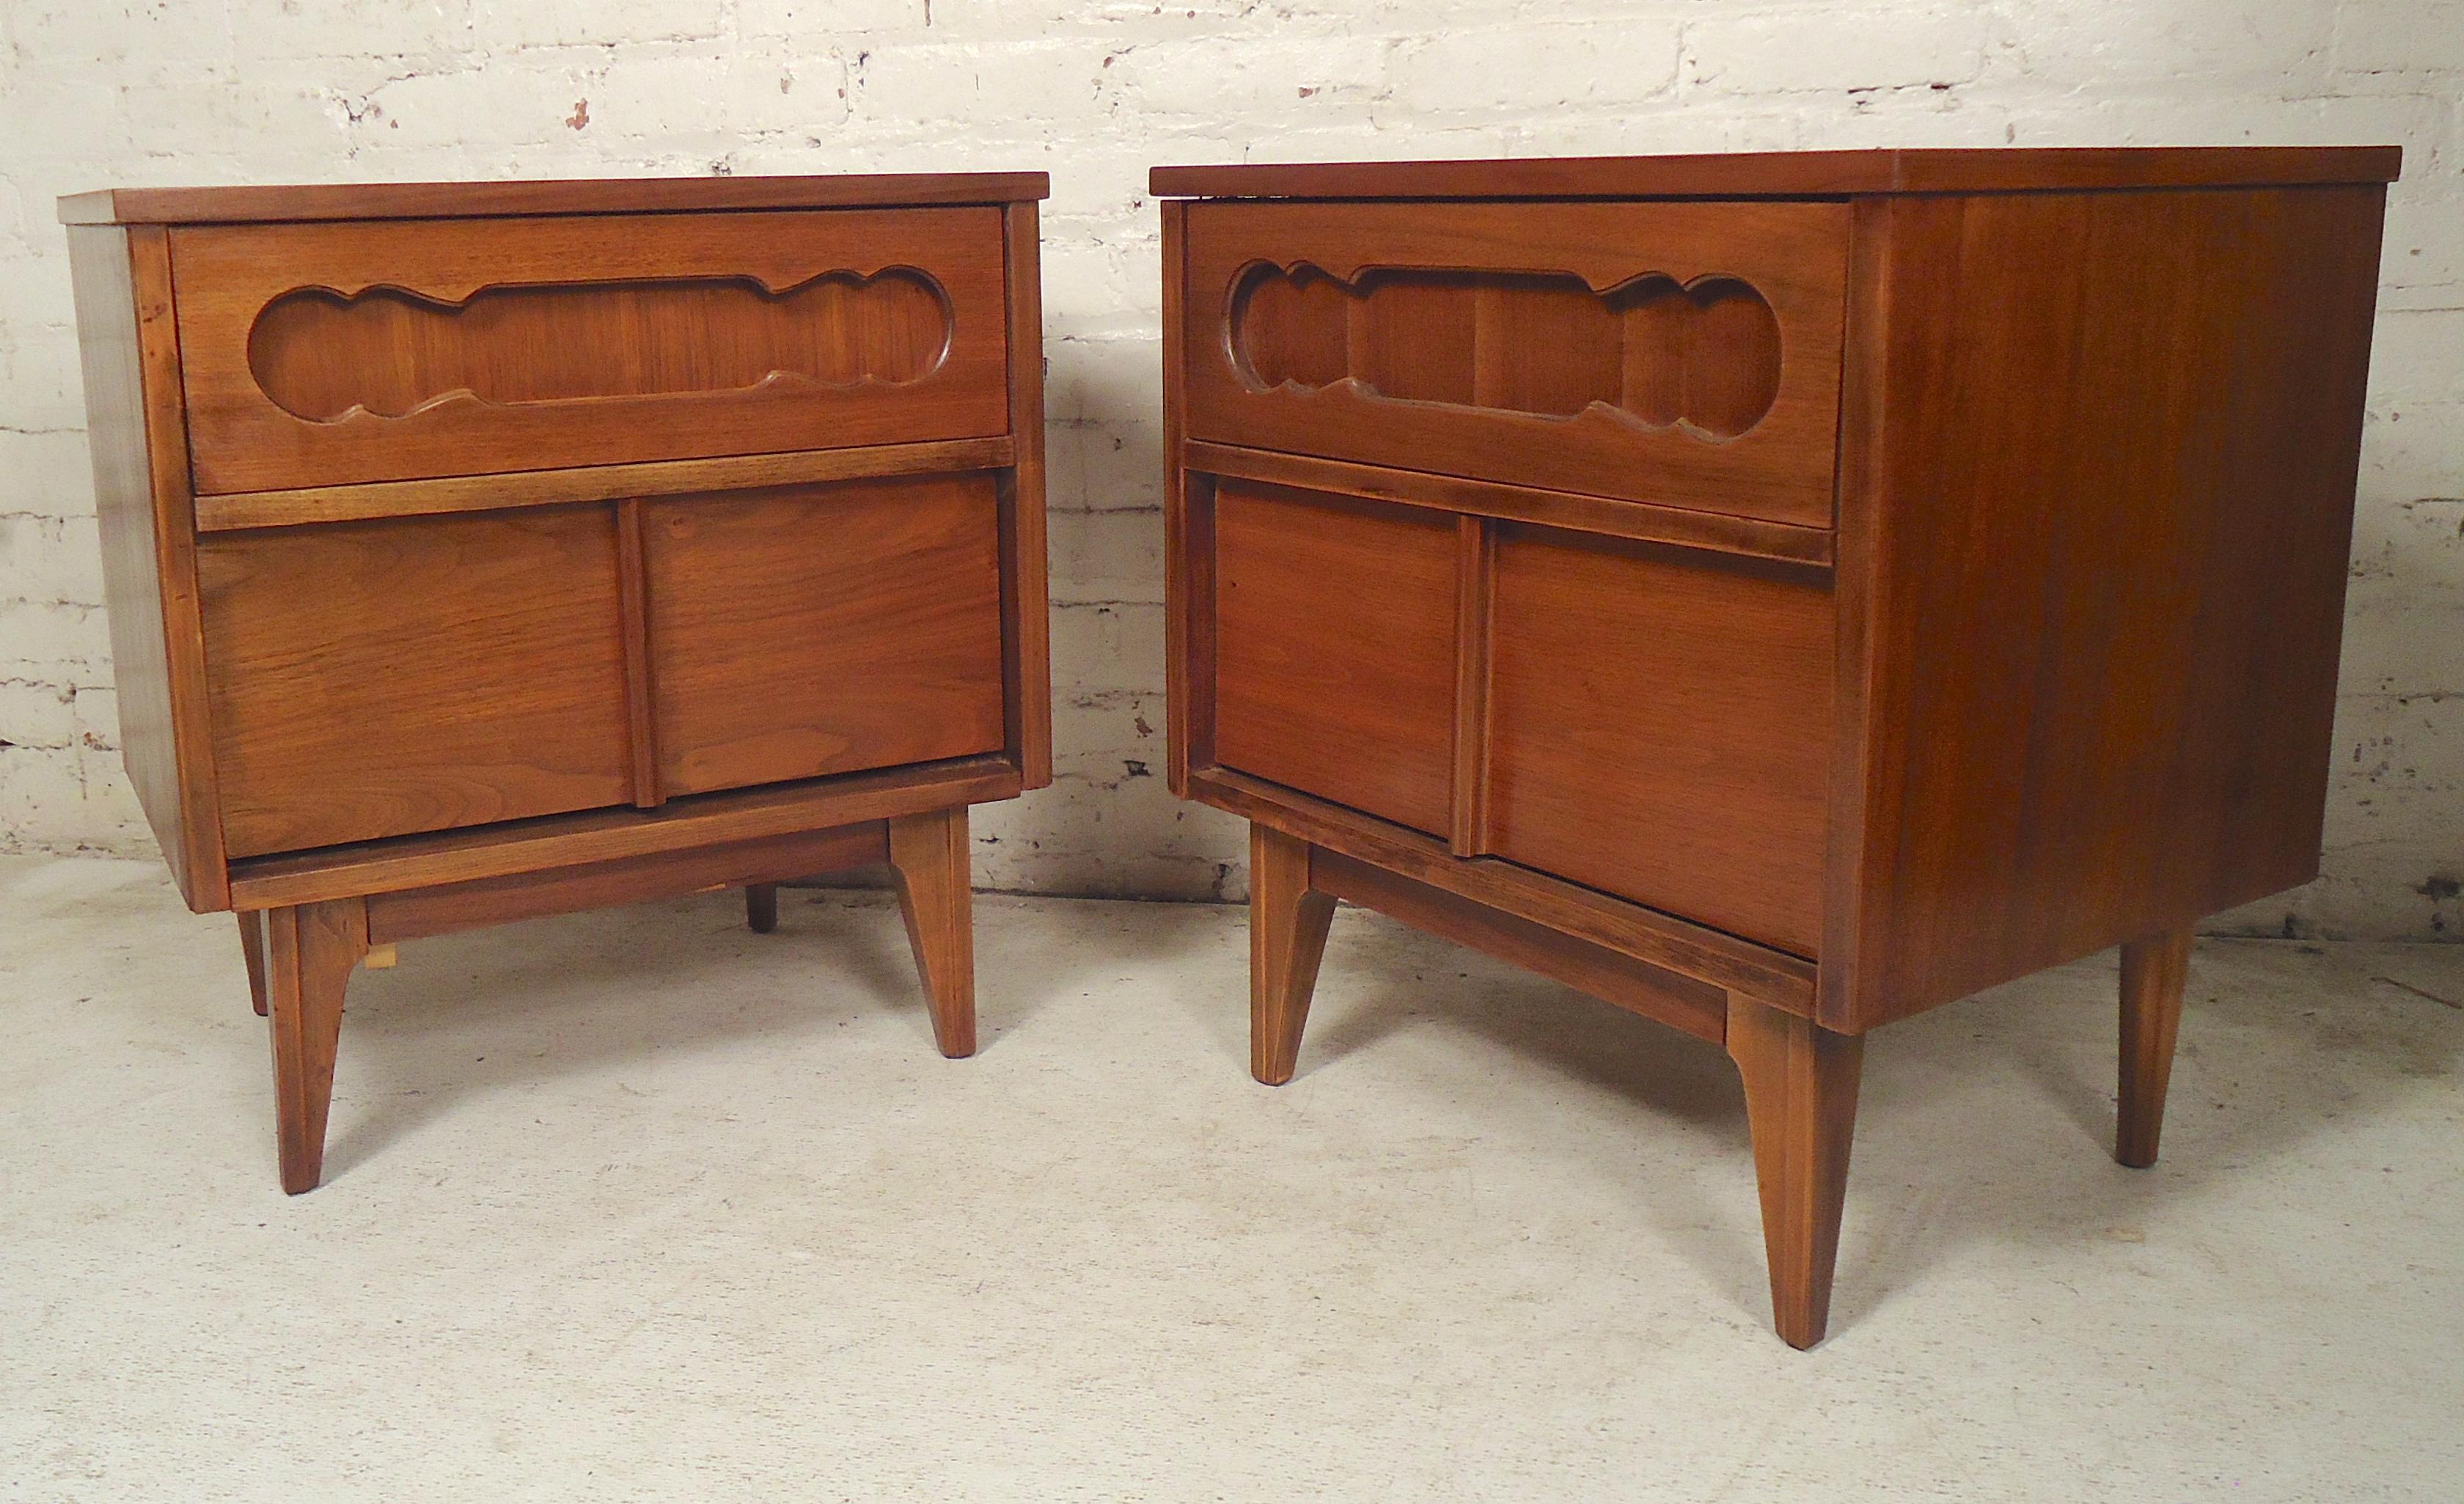 Pair of vintage nightstands with two drawers and decorative sculpted fronts.
(Please confirm item location - NY or NJ - with dealer).
 